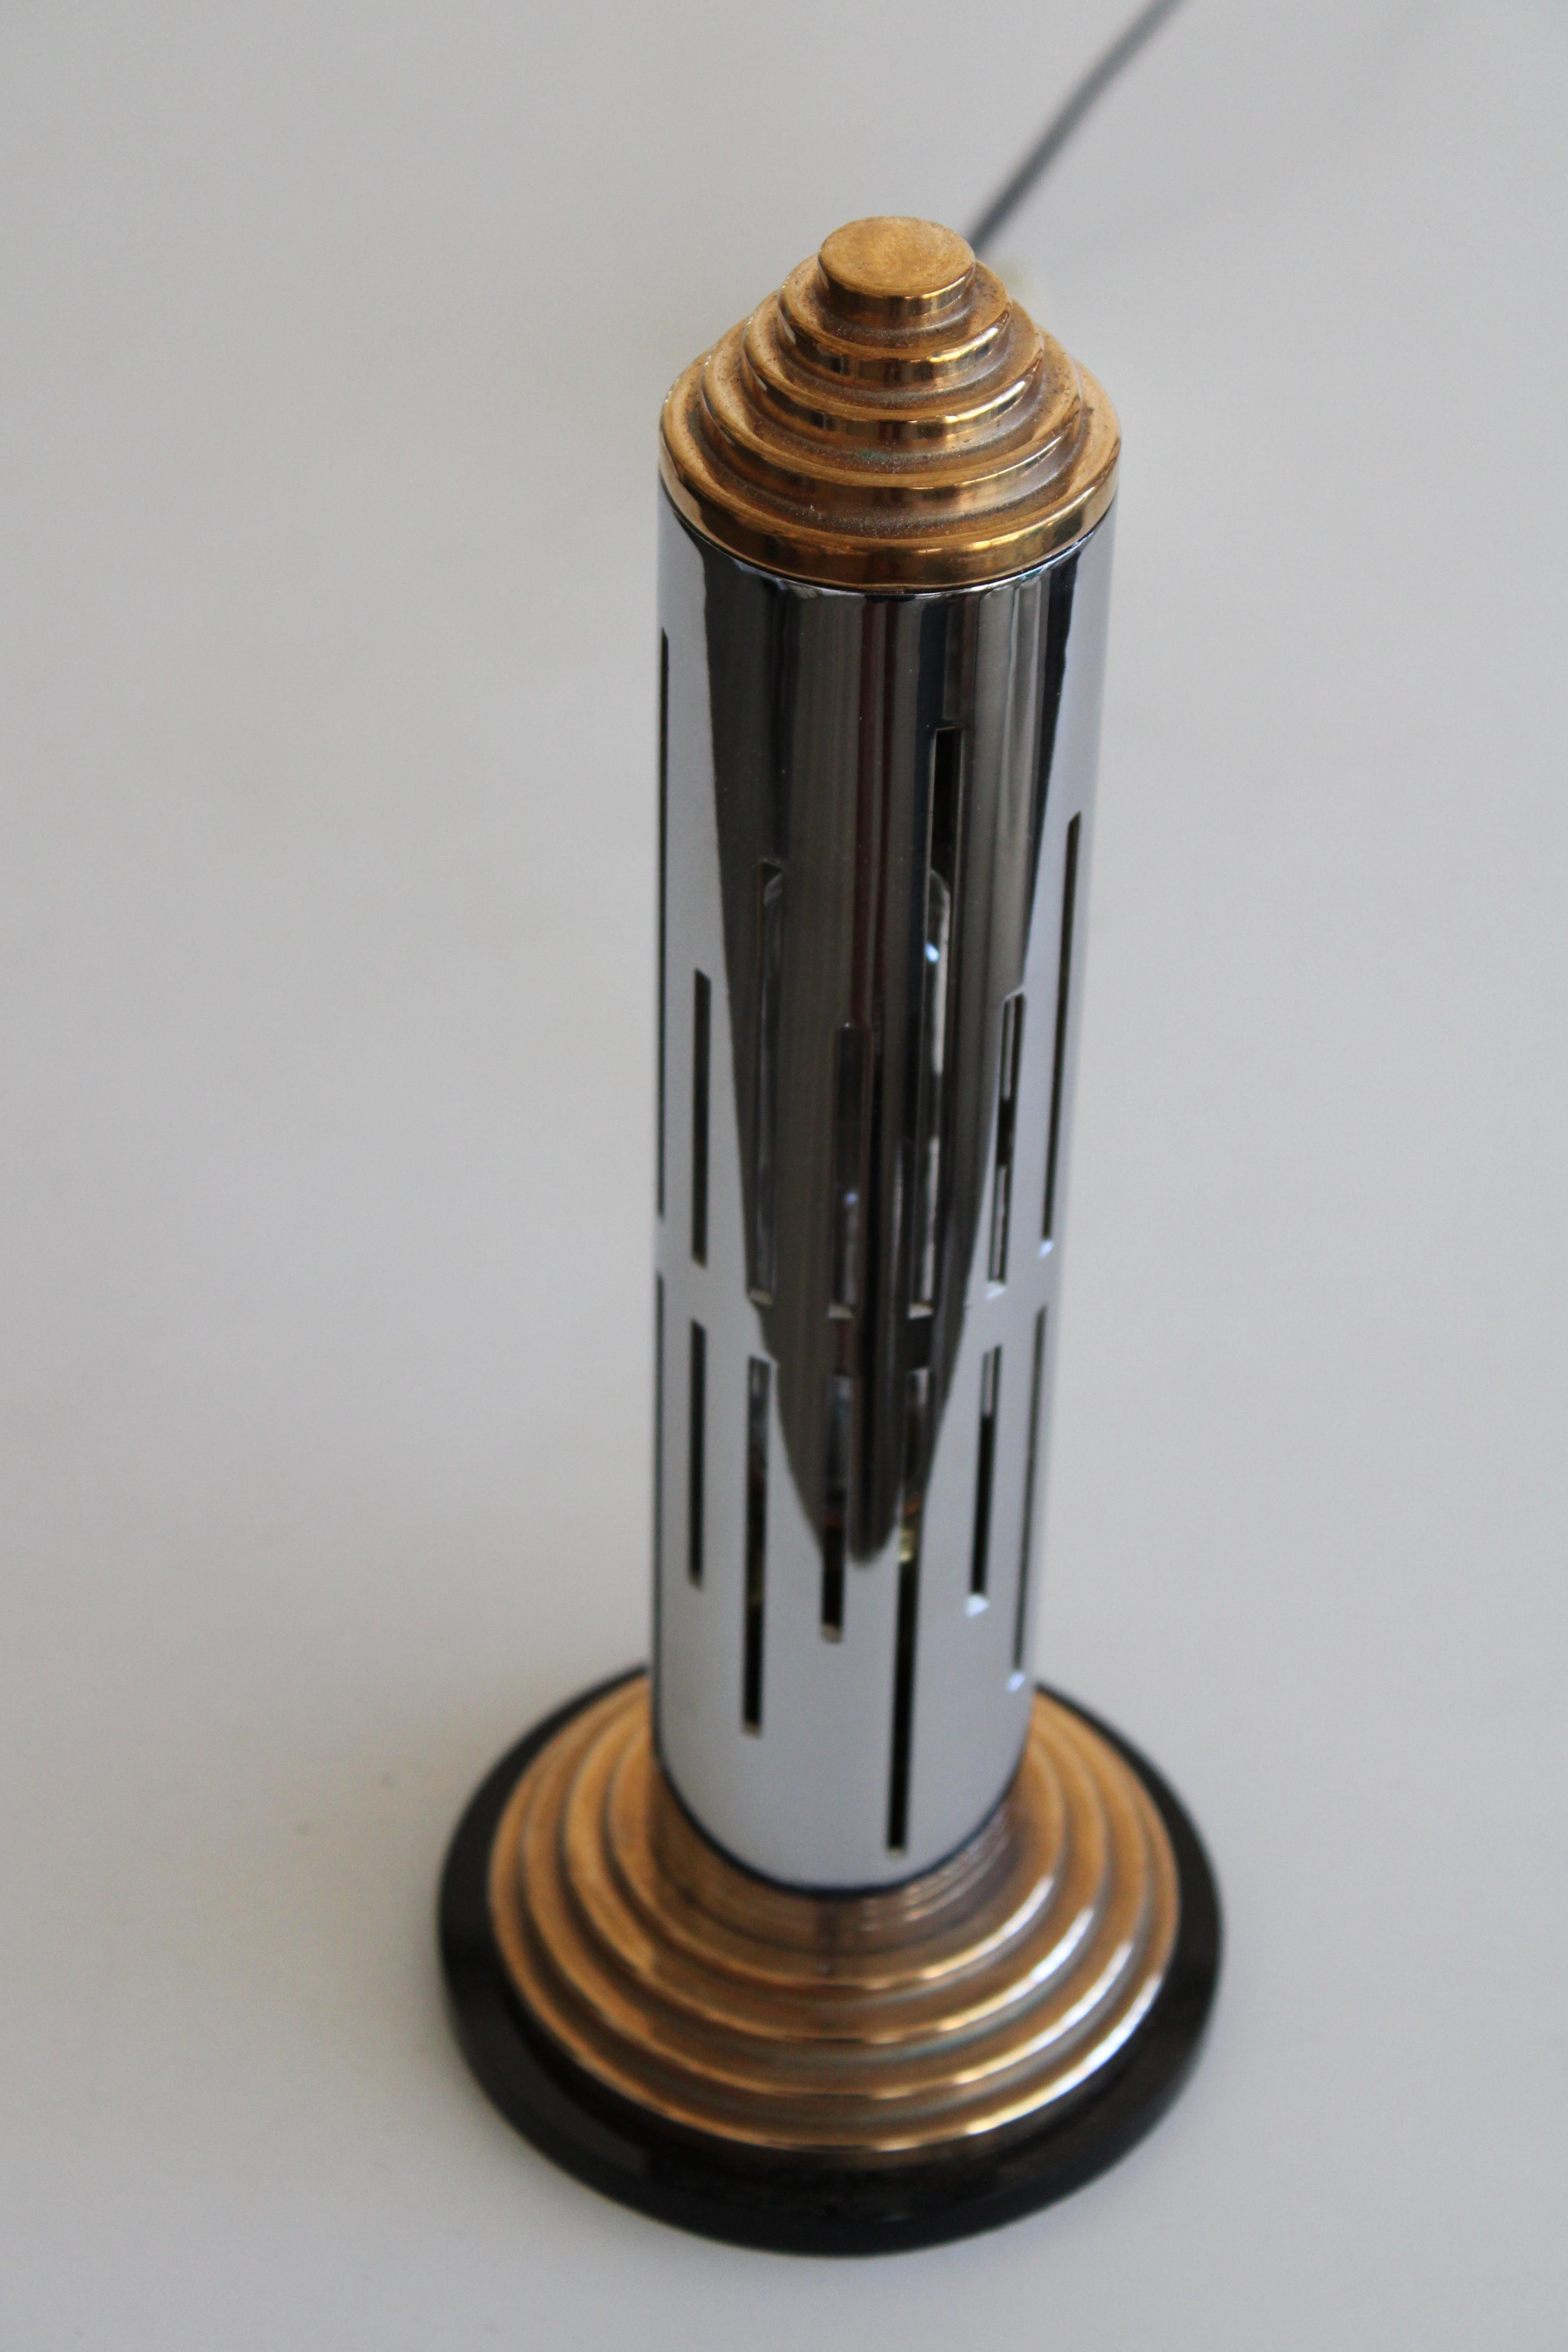 A streamlined Art Deco tower lamp with vertical slot openings where light emits. Black lucite disc supports a solid bronze stair-step base, chromed steel tower and solid bronze top. Lamp is rewired with an in-line dimmer switch. Lamp measures 12